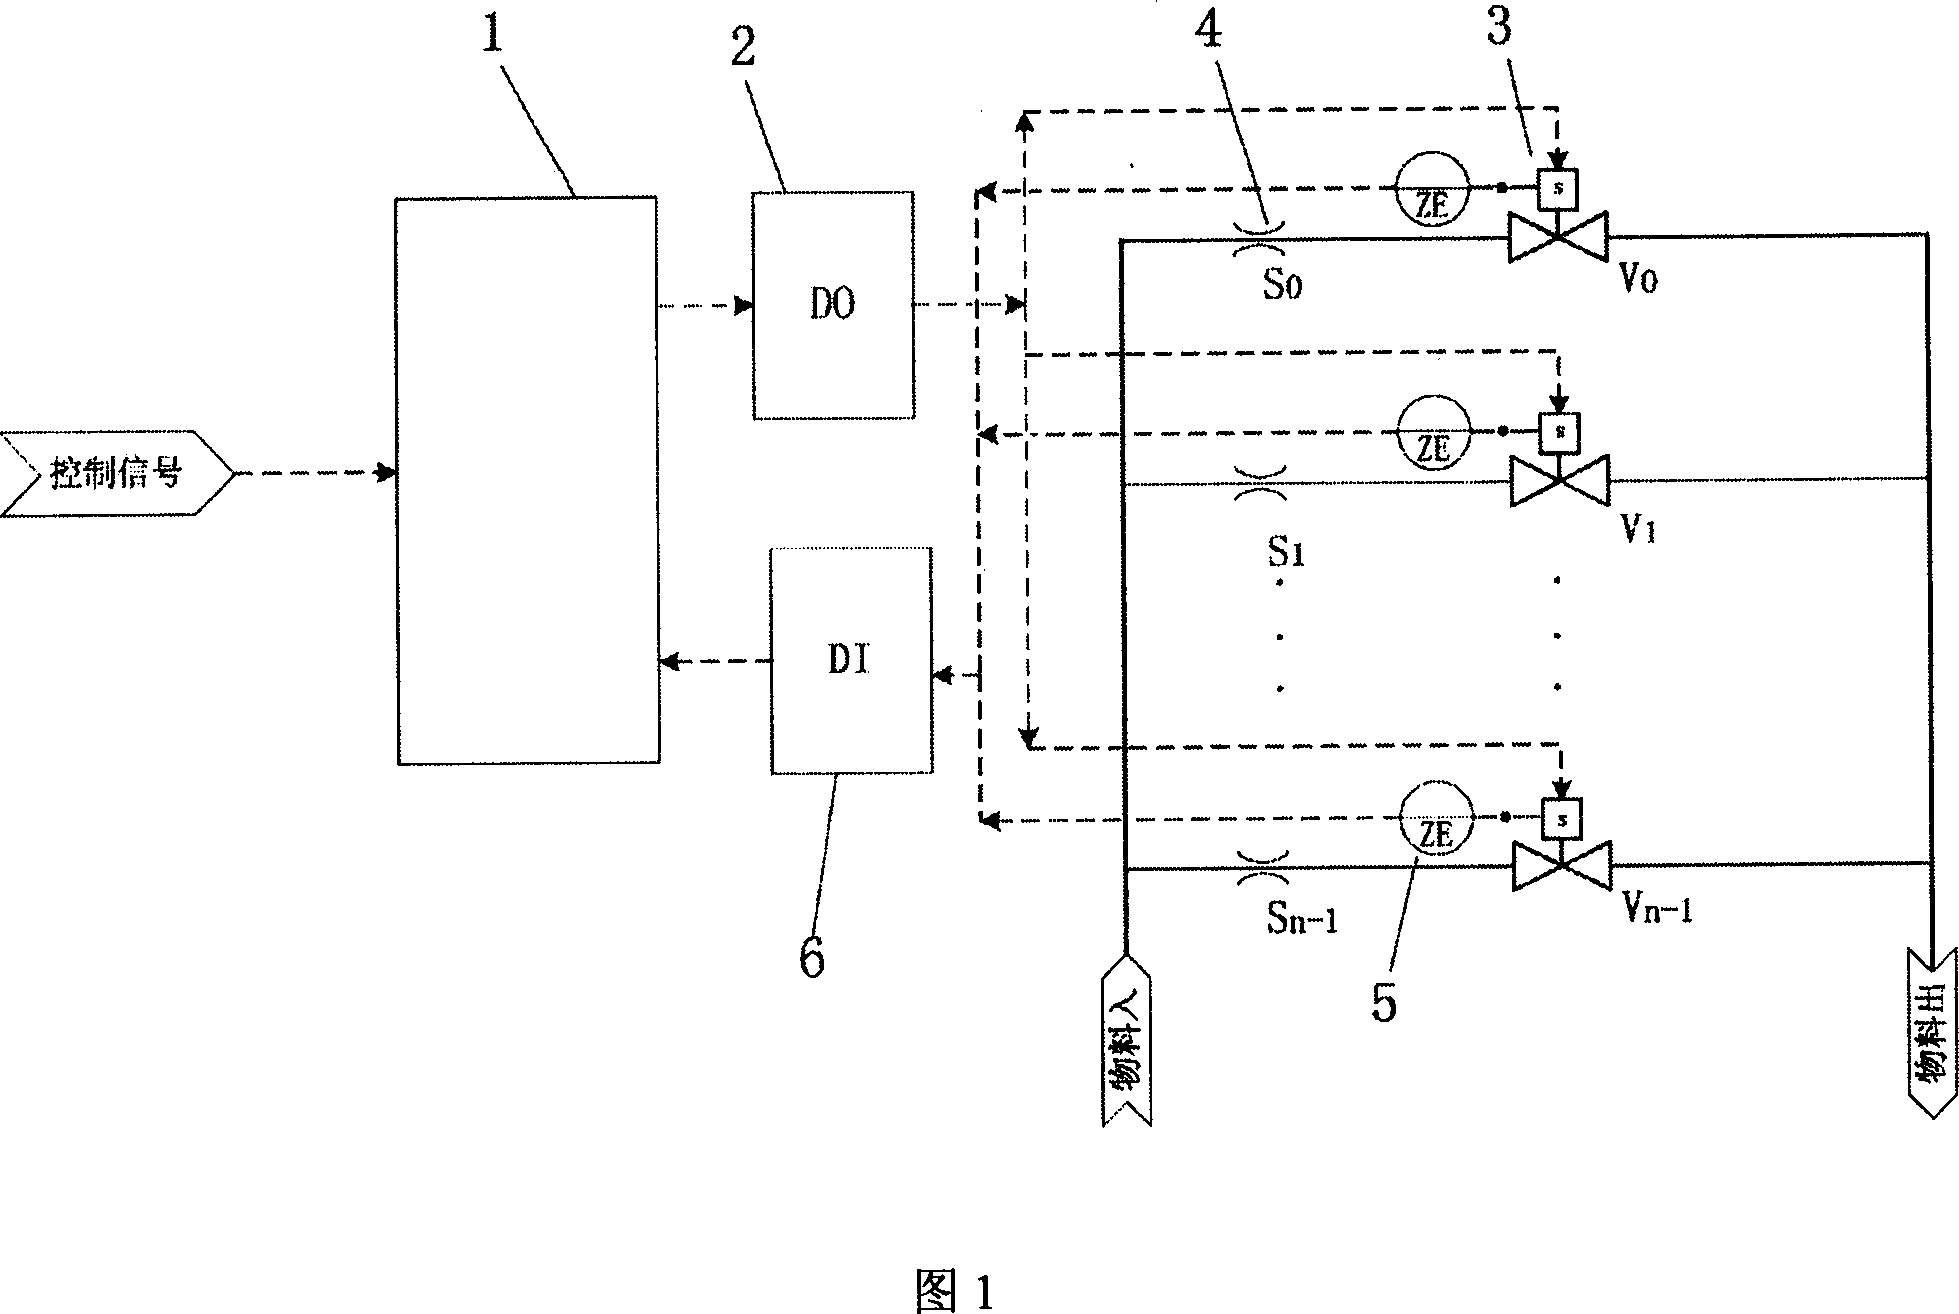 Flow control system and control method in mixed mode of pulse code modulation and pulse width modulation